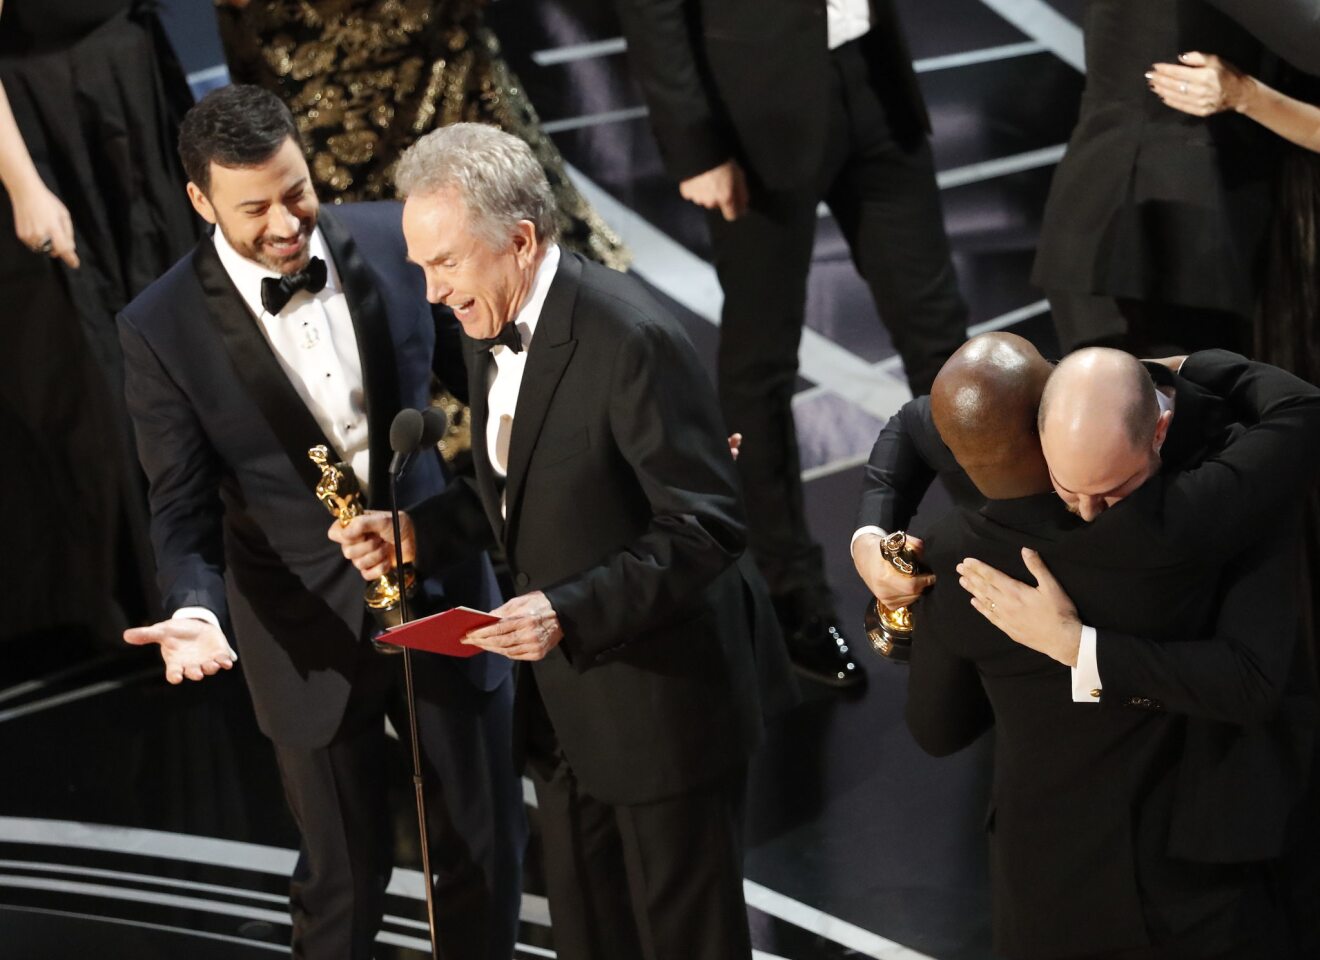 Presenter Warren Beatty and host Jimmy Kimmel try to explain to the audience how the wrong envelope for best picture was read on stage during the Academy Awards telecast on Feb. 26. In background are "Moonlight" writer/director Barry Jenkins, left and "La La Land" producer Jordan Horowitz embracing.